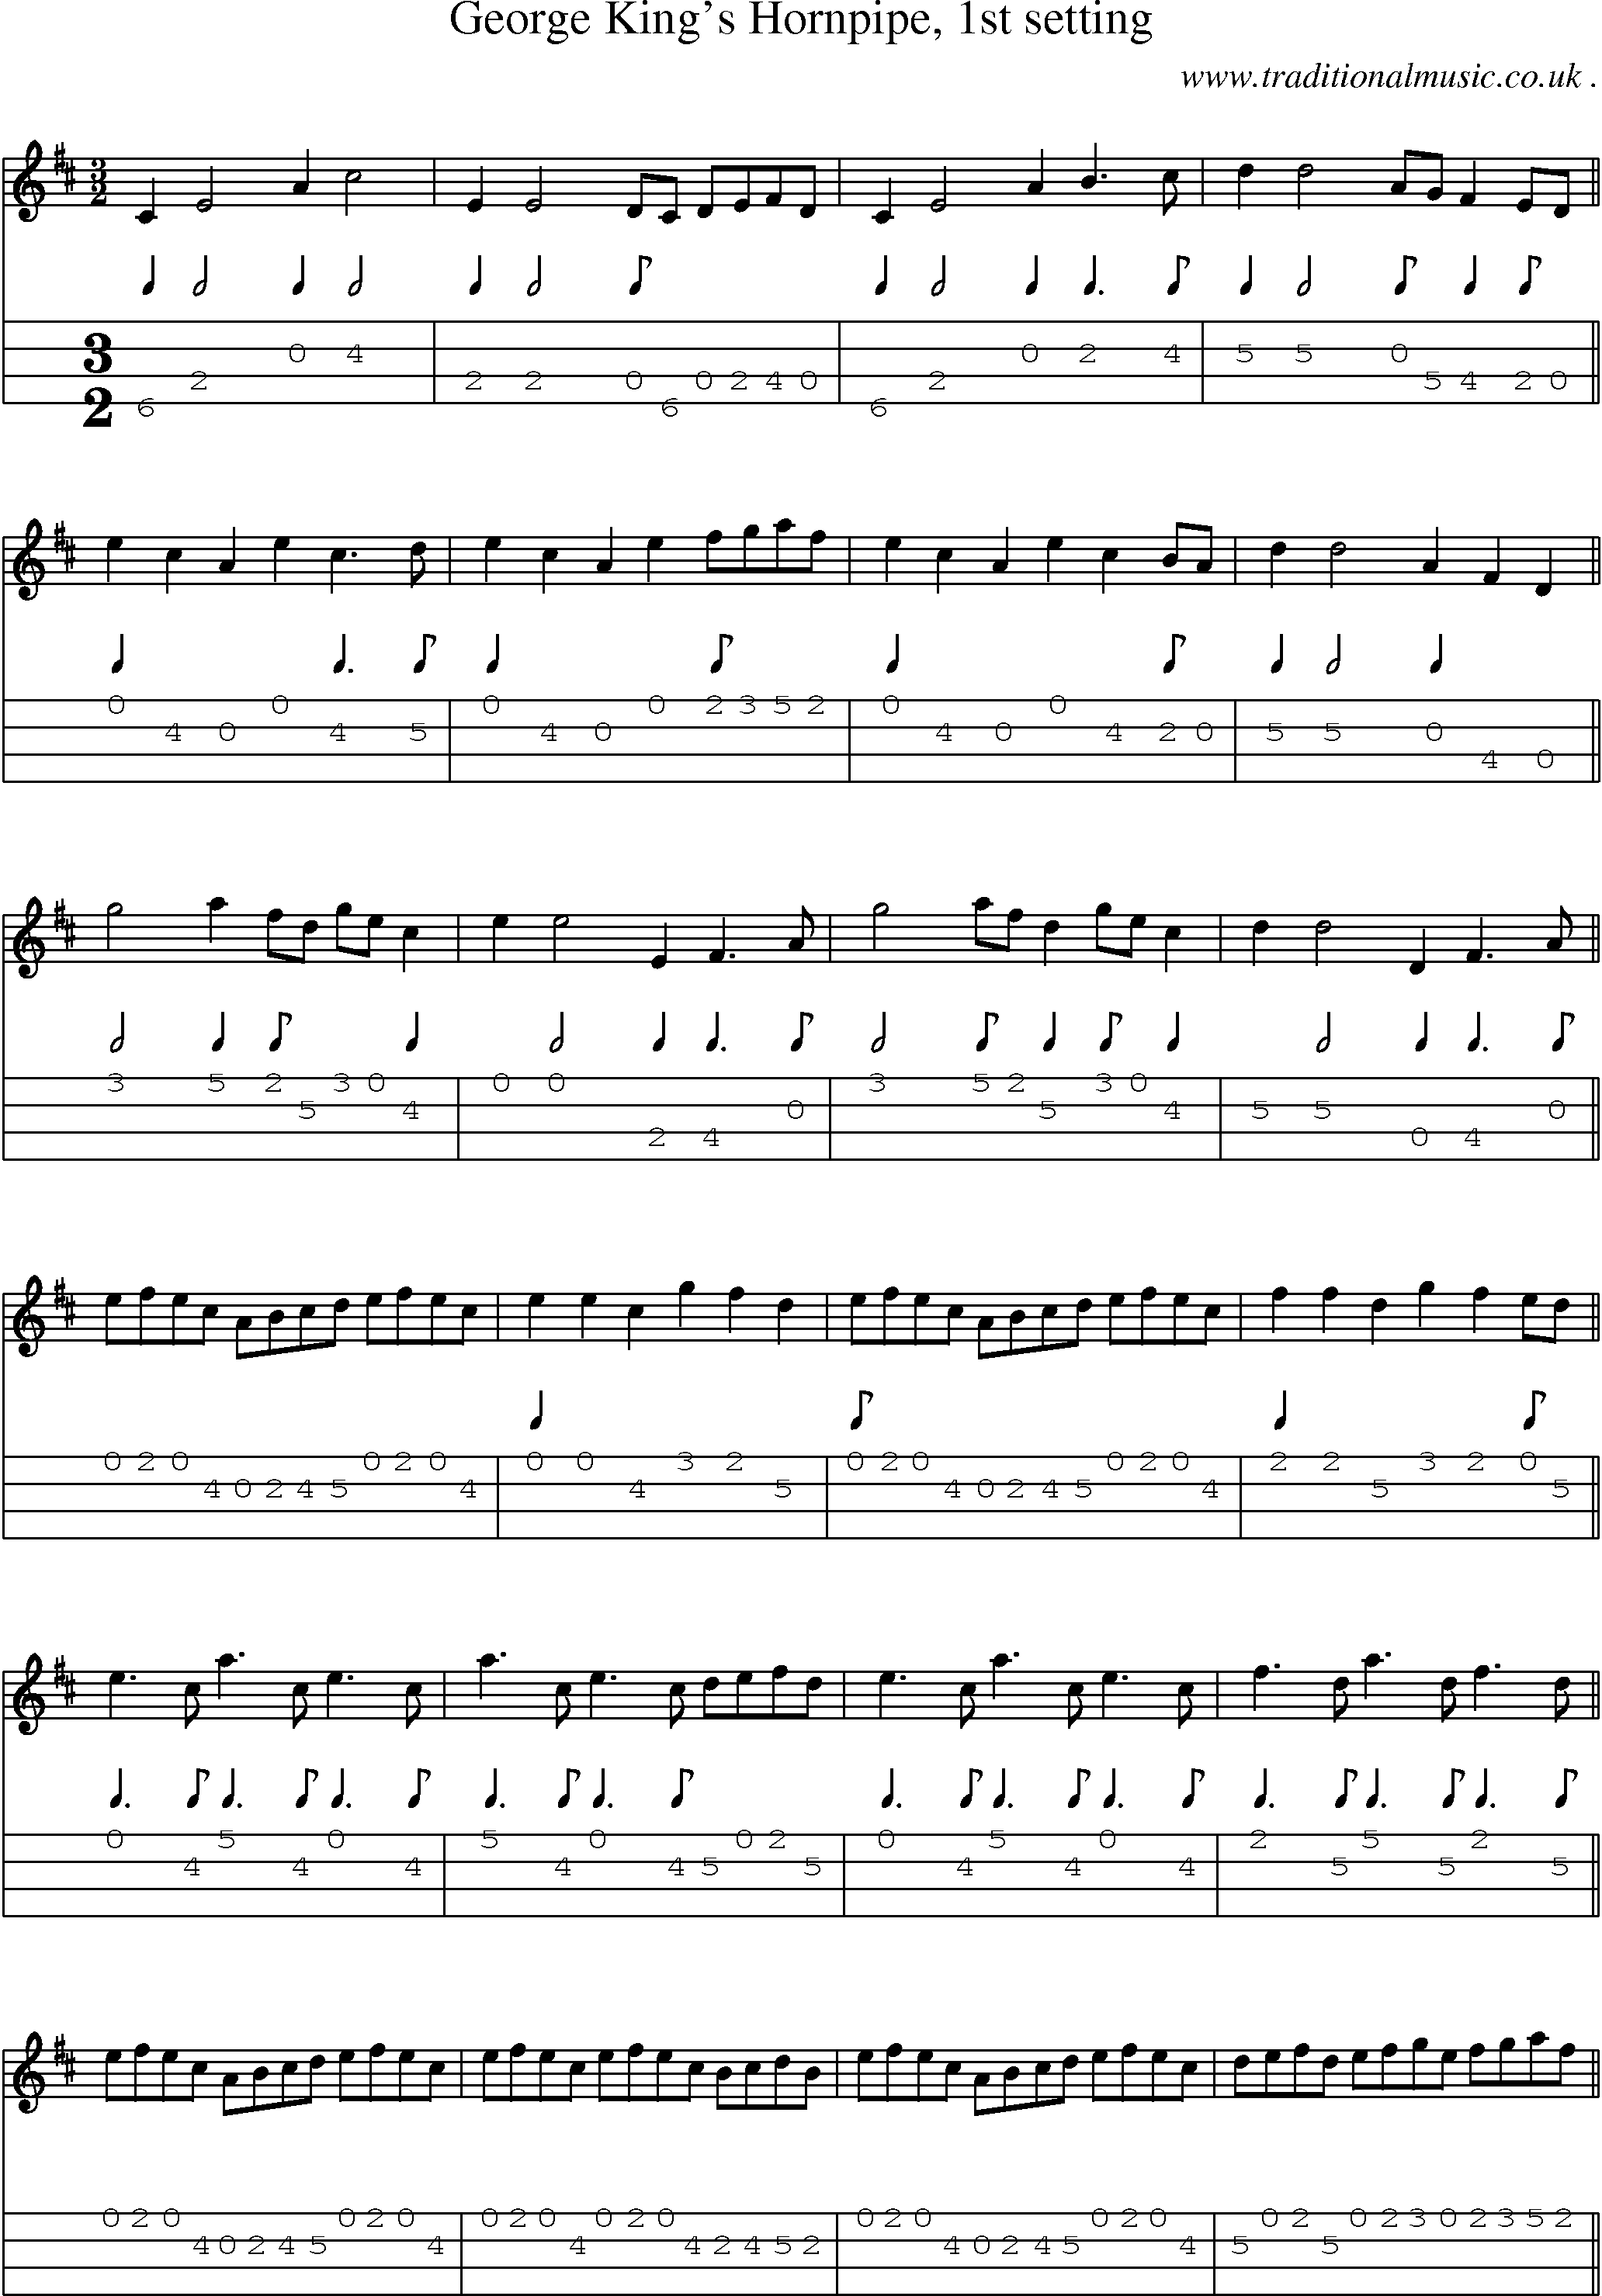 Sheet-Music and Mandolin Tabs for George Kings Hornpipe 1st Setting